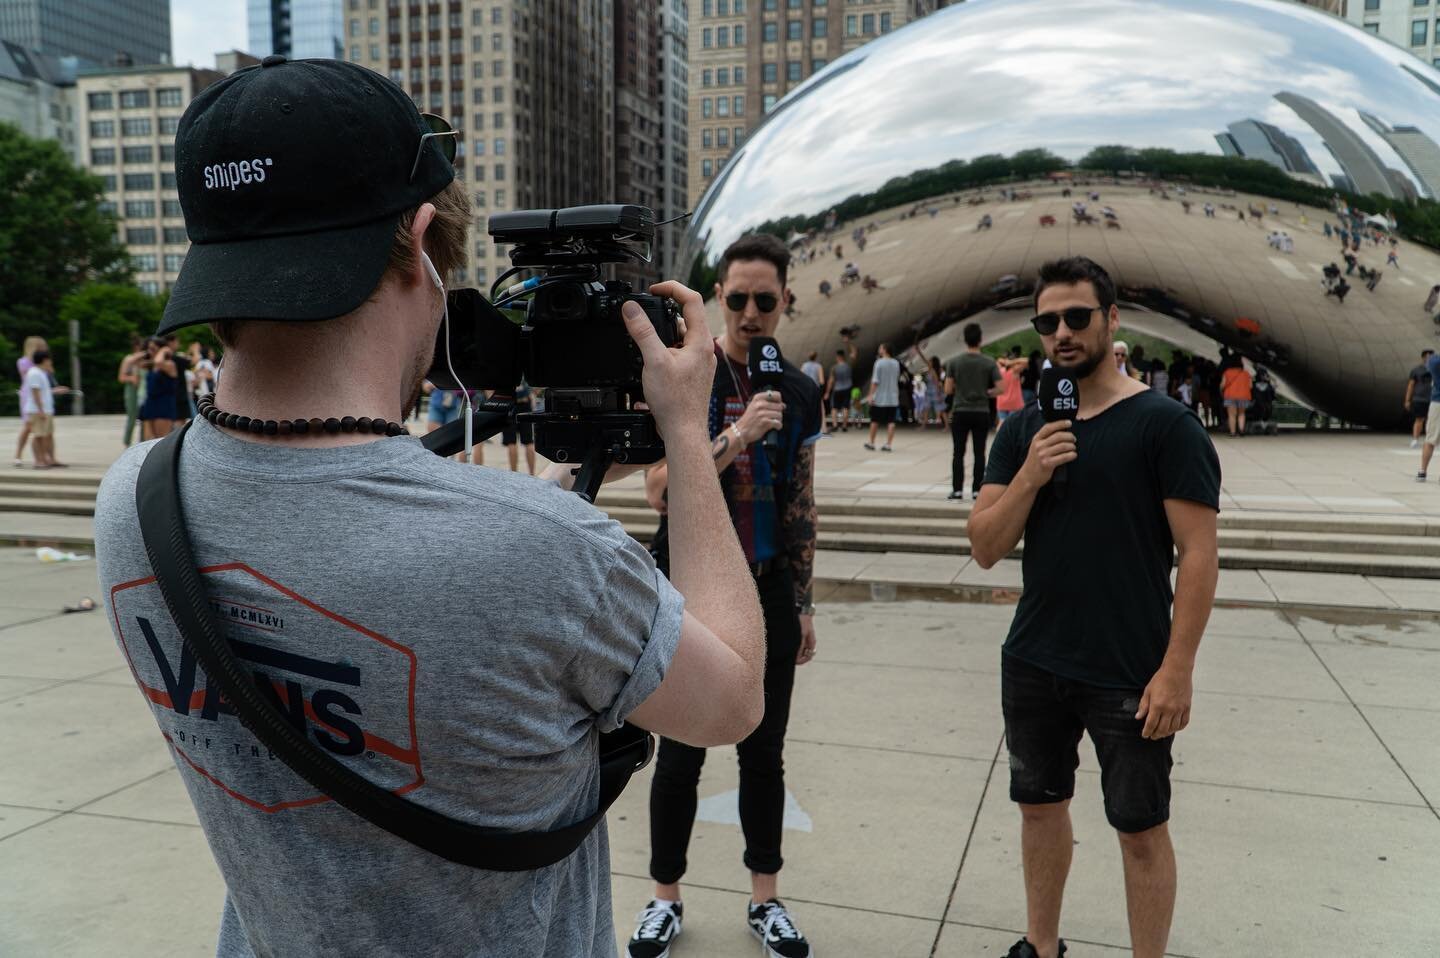 Working out in Chicago with @eslgaming for #iem 
Took a few snaps of the Windy City and @shaneomadshaneomad got some #bts of me in action 📷👌🏻
.
.
.
.
#videographer #filmmaker #creative #behindthescenes #socialmediavideo #contentcreator #esports #f